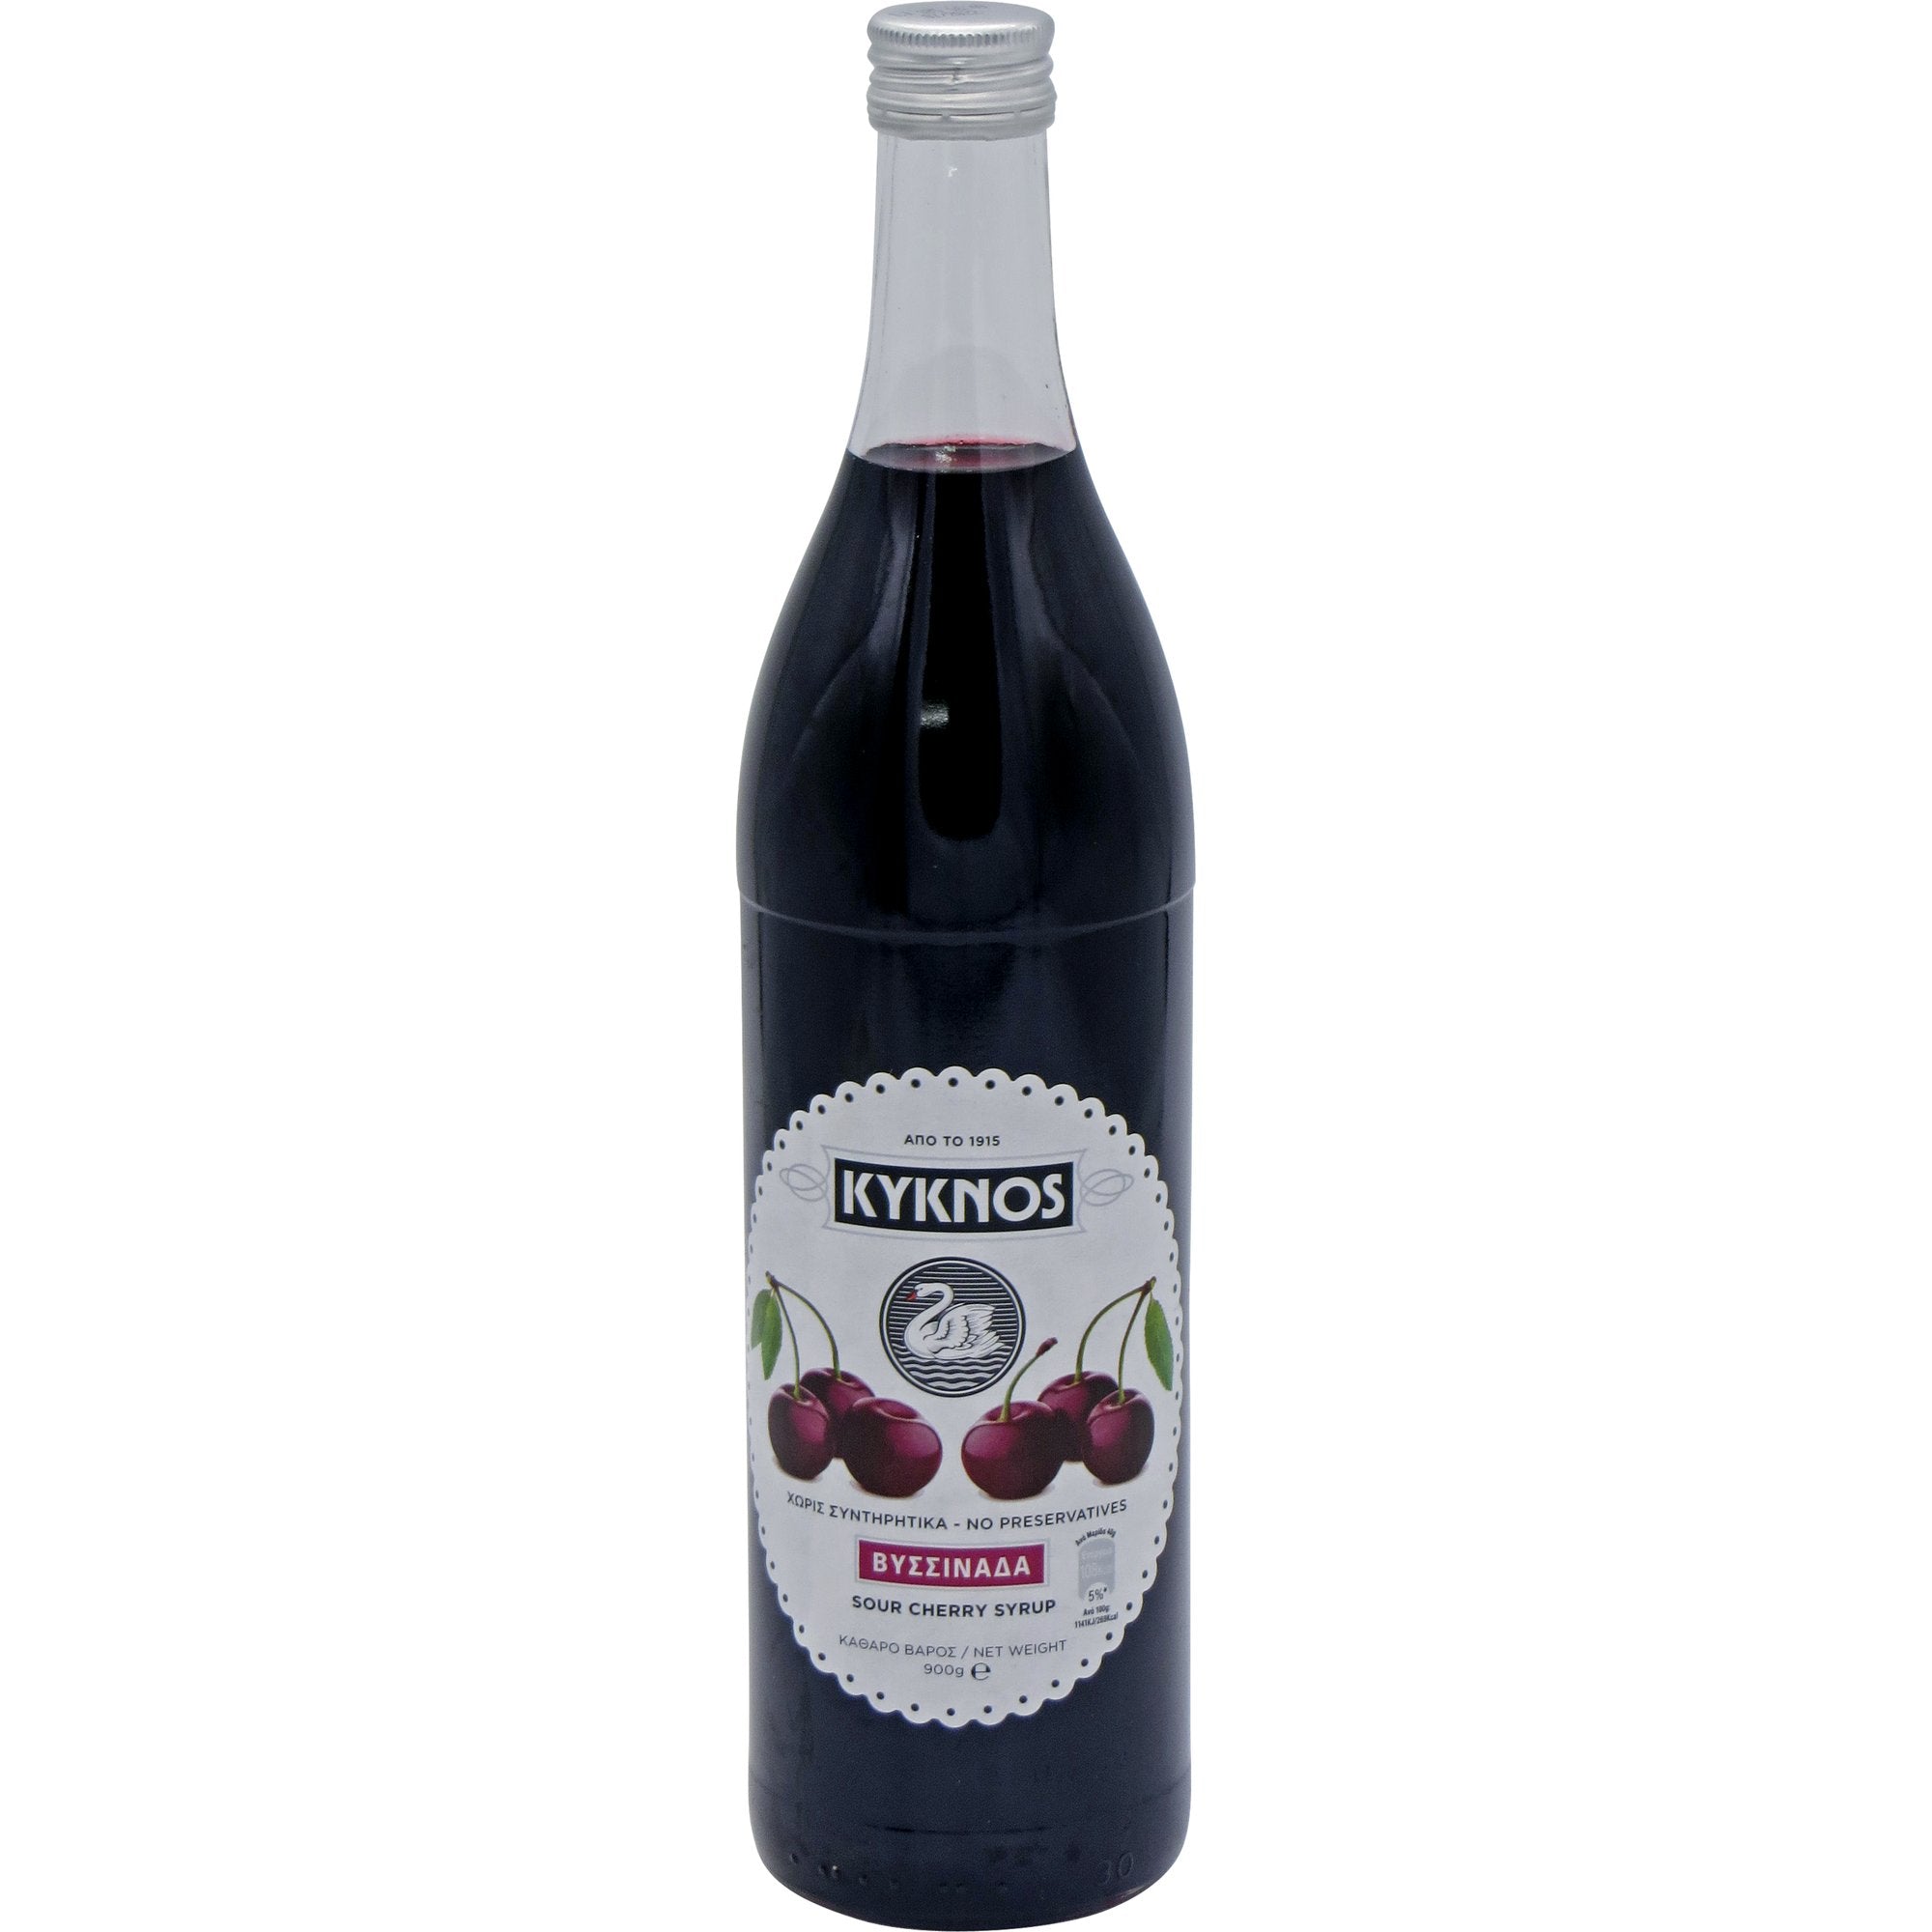 KYKNOS Sour Cherry Syrup 900mL